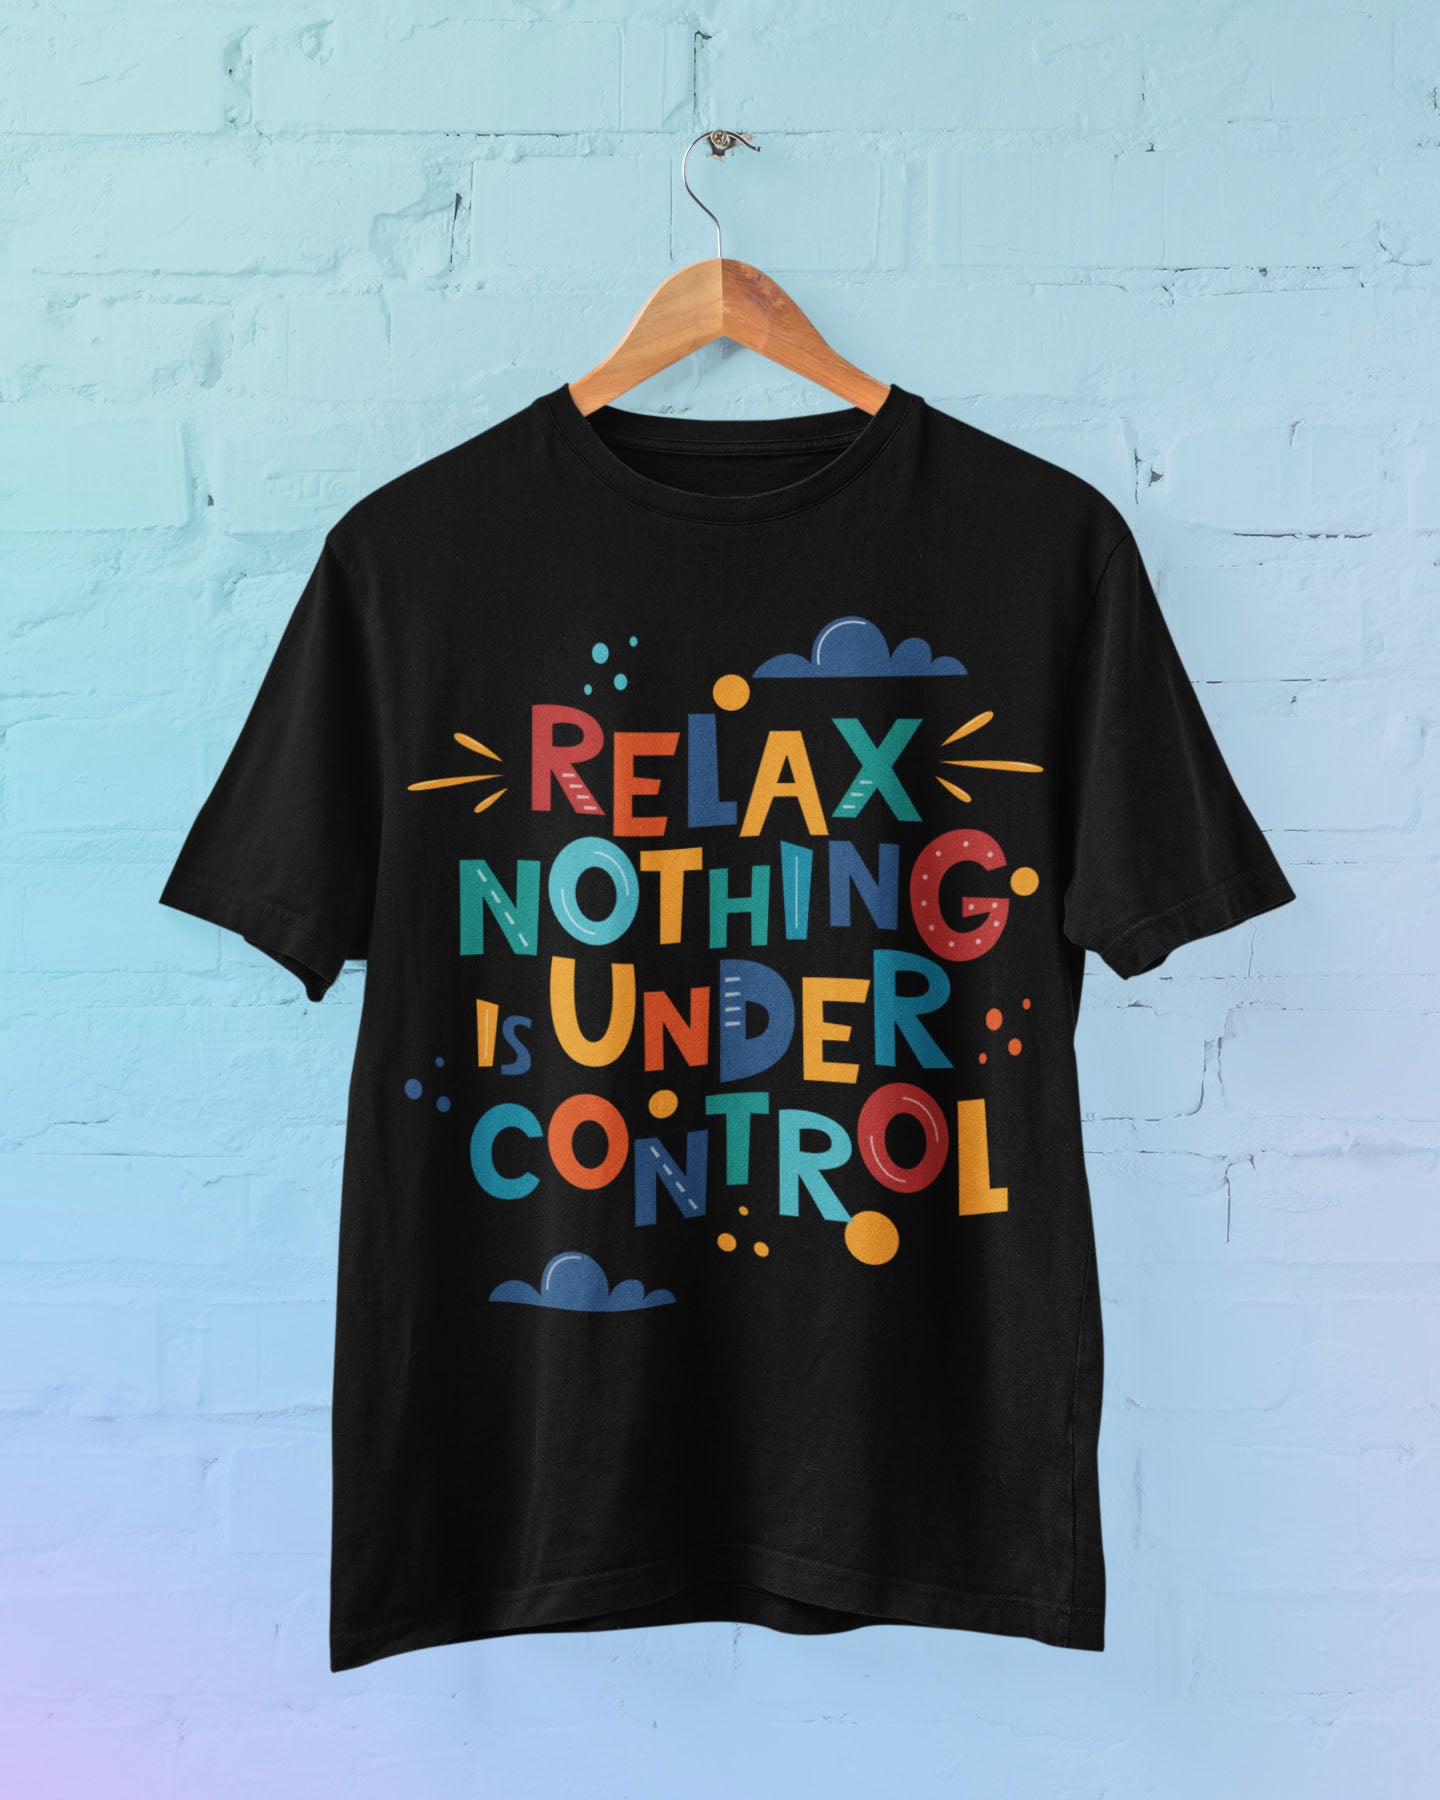 Relax Nothing Men's Cotton T-Shirt